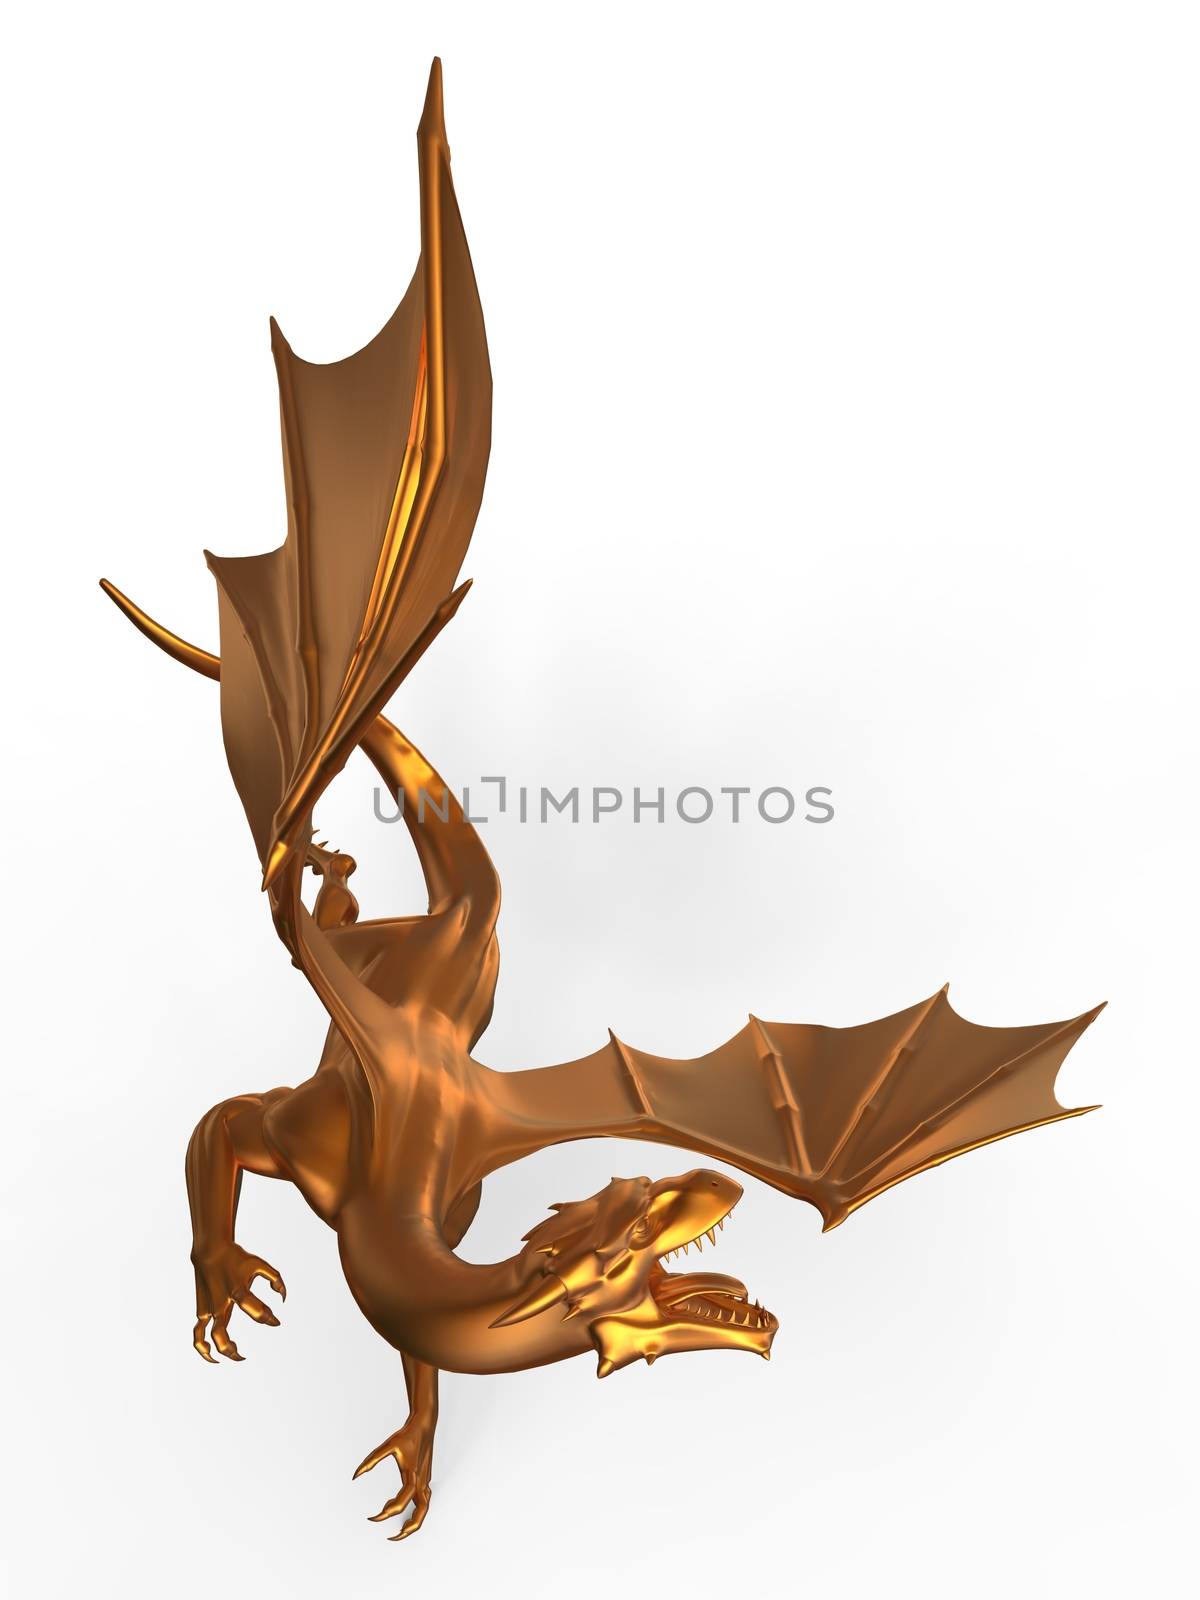 3D digital render of a soaring fantasy golden dragon isolated on white background